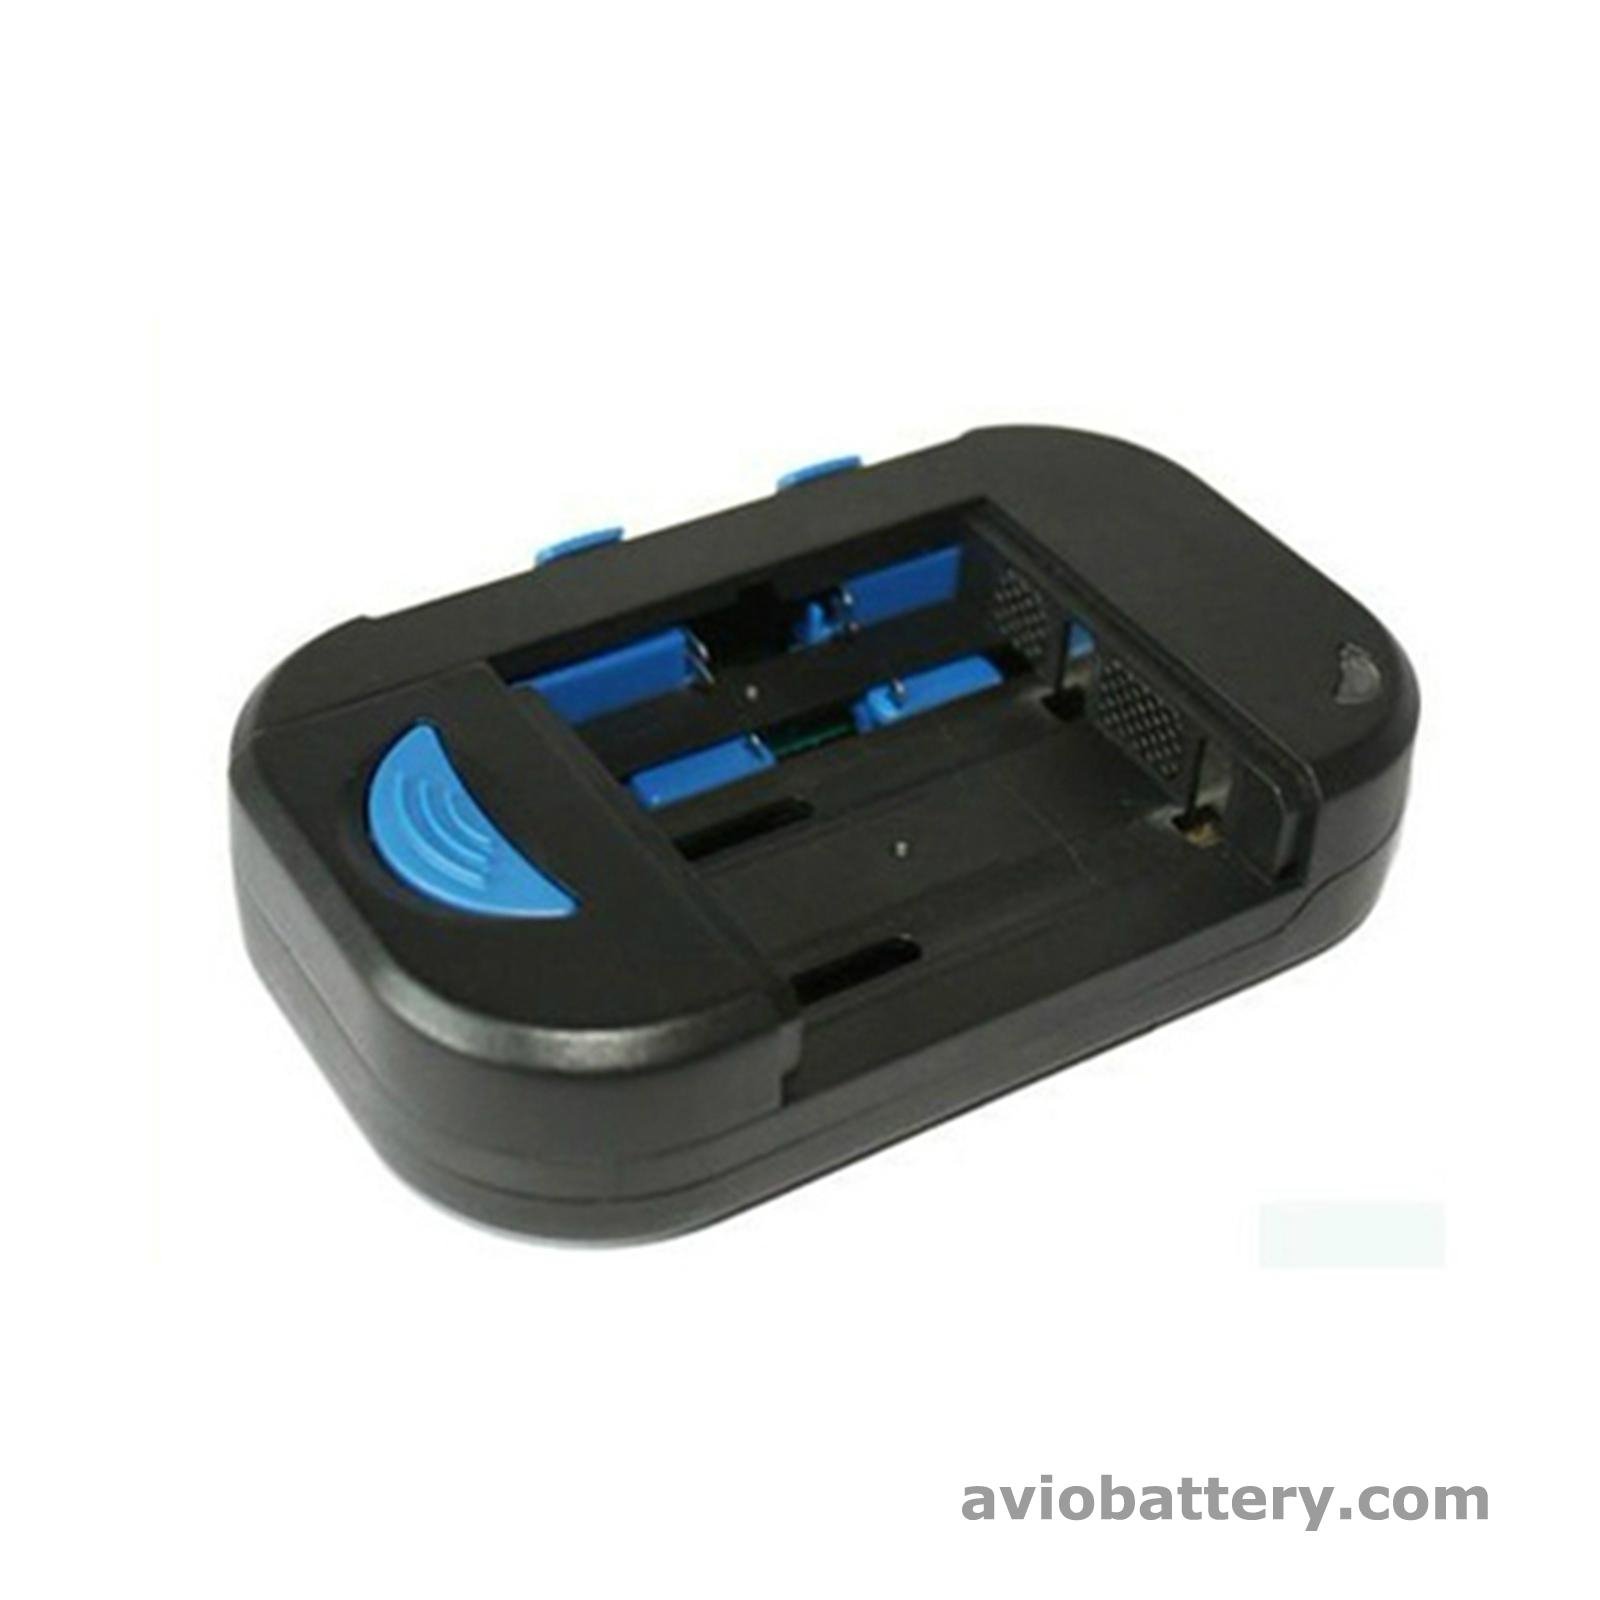 Universal camera battery charger for digital camera batteries